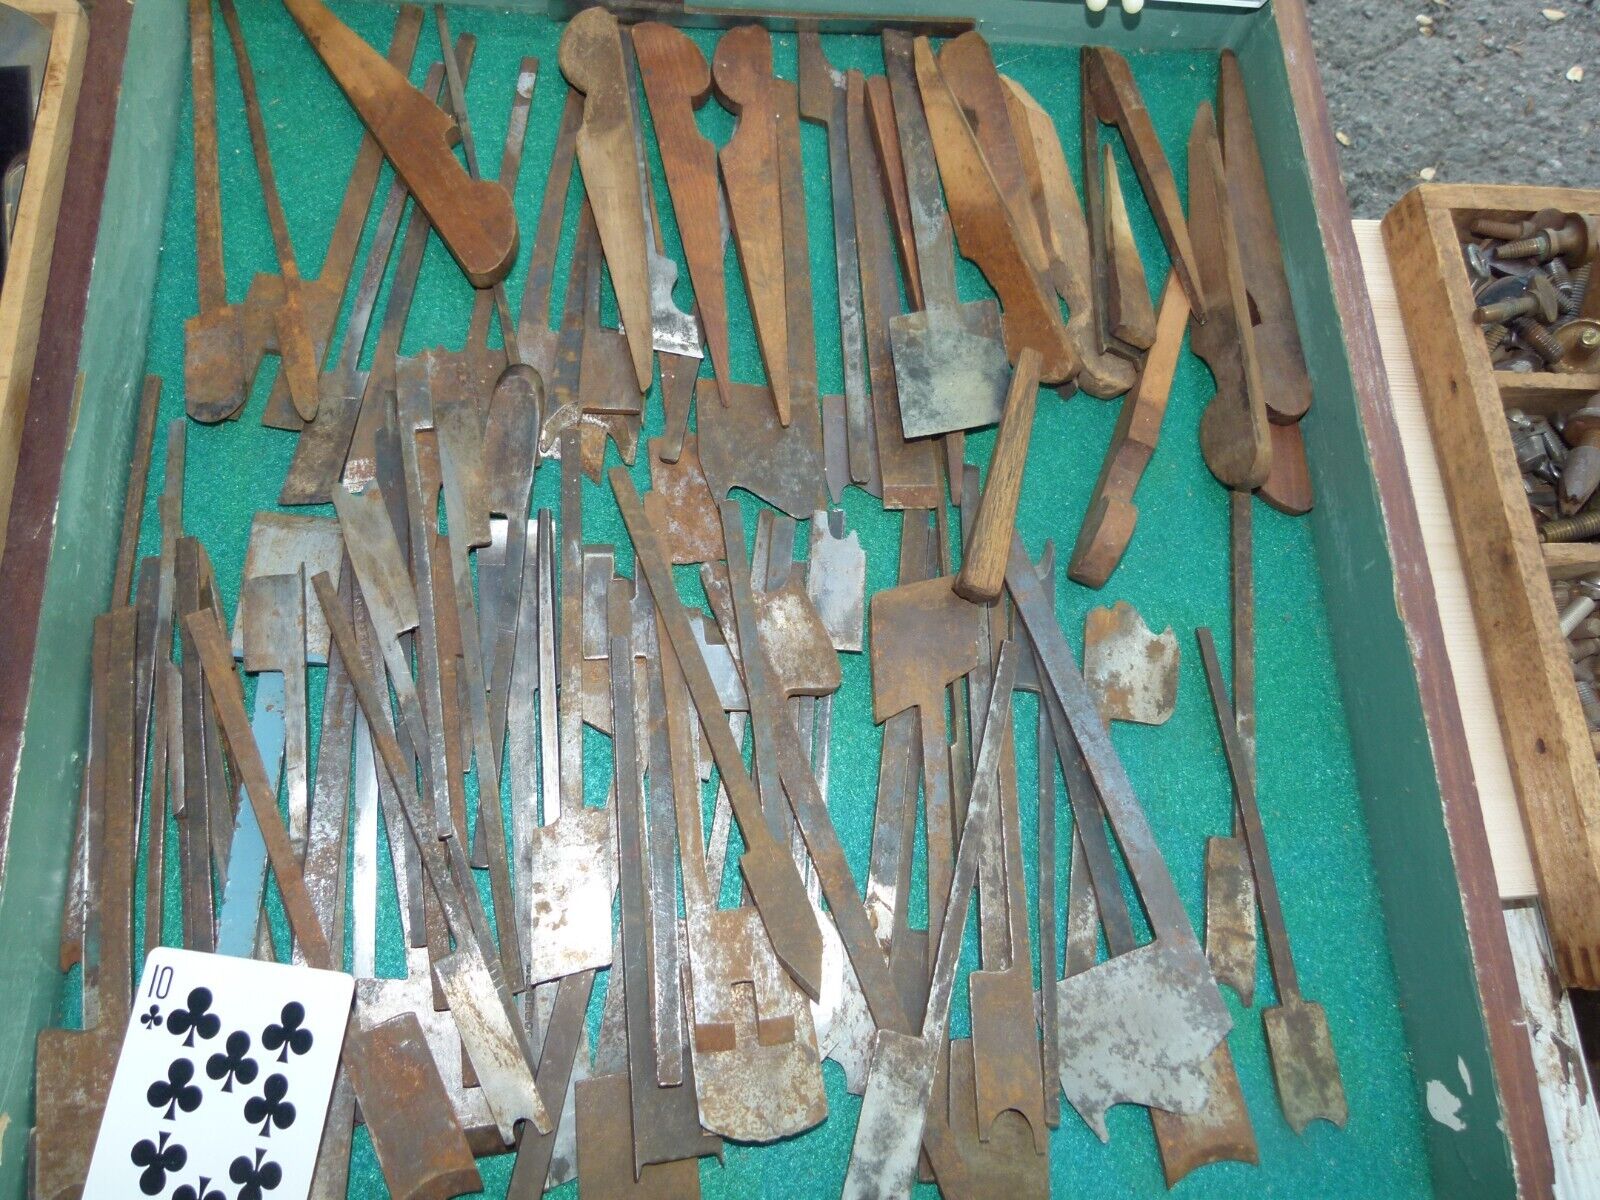 ANTIQUE TOOLS  LIFETIME COLLECTION OF MOLDING PLANE CUTTERS AND WEDGES